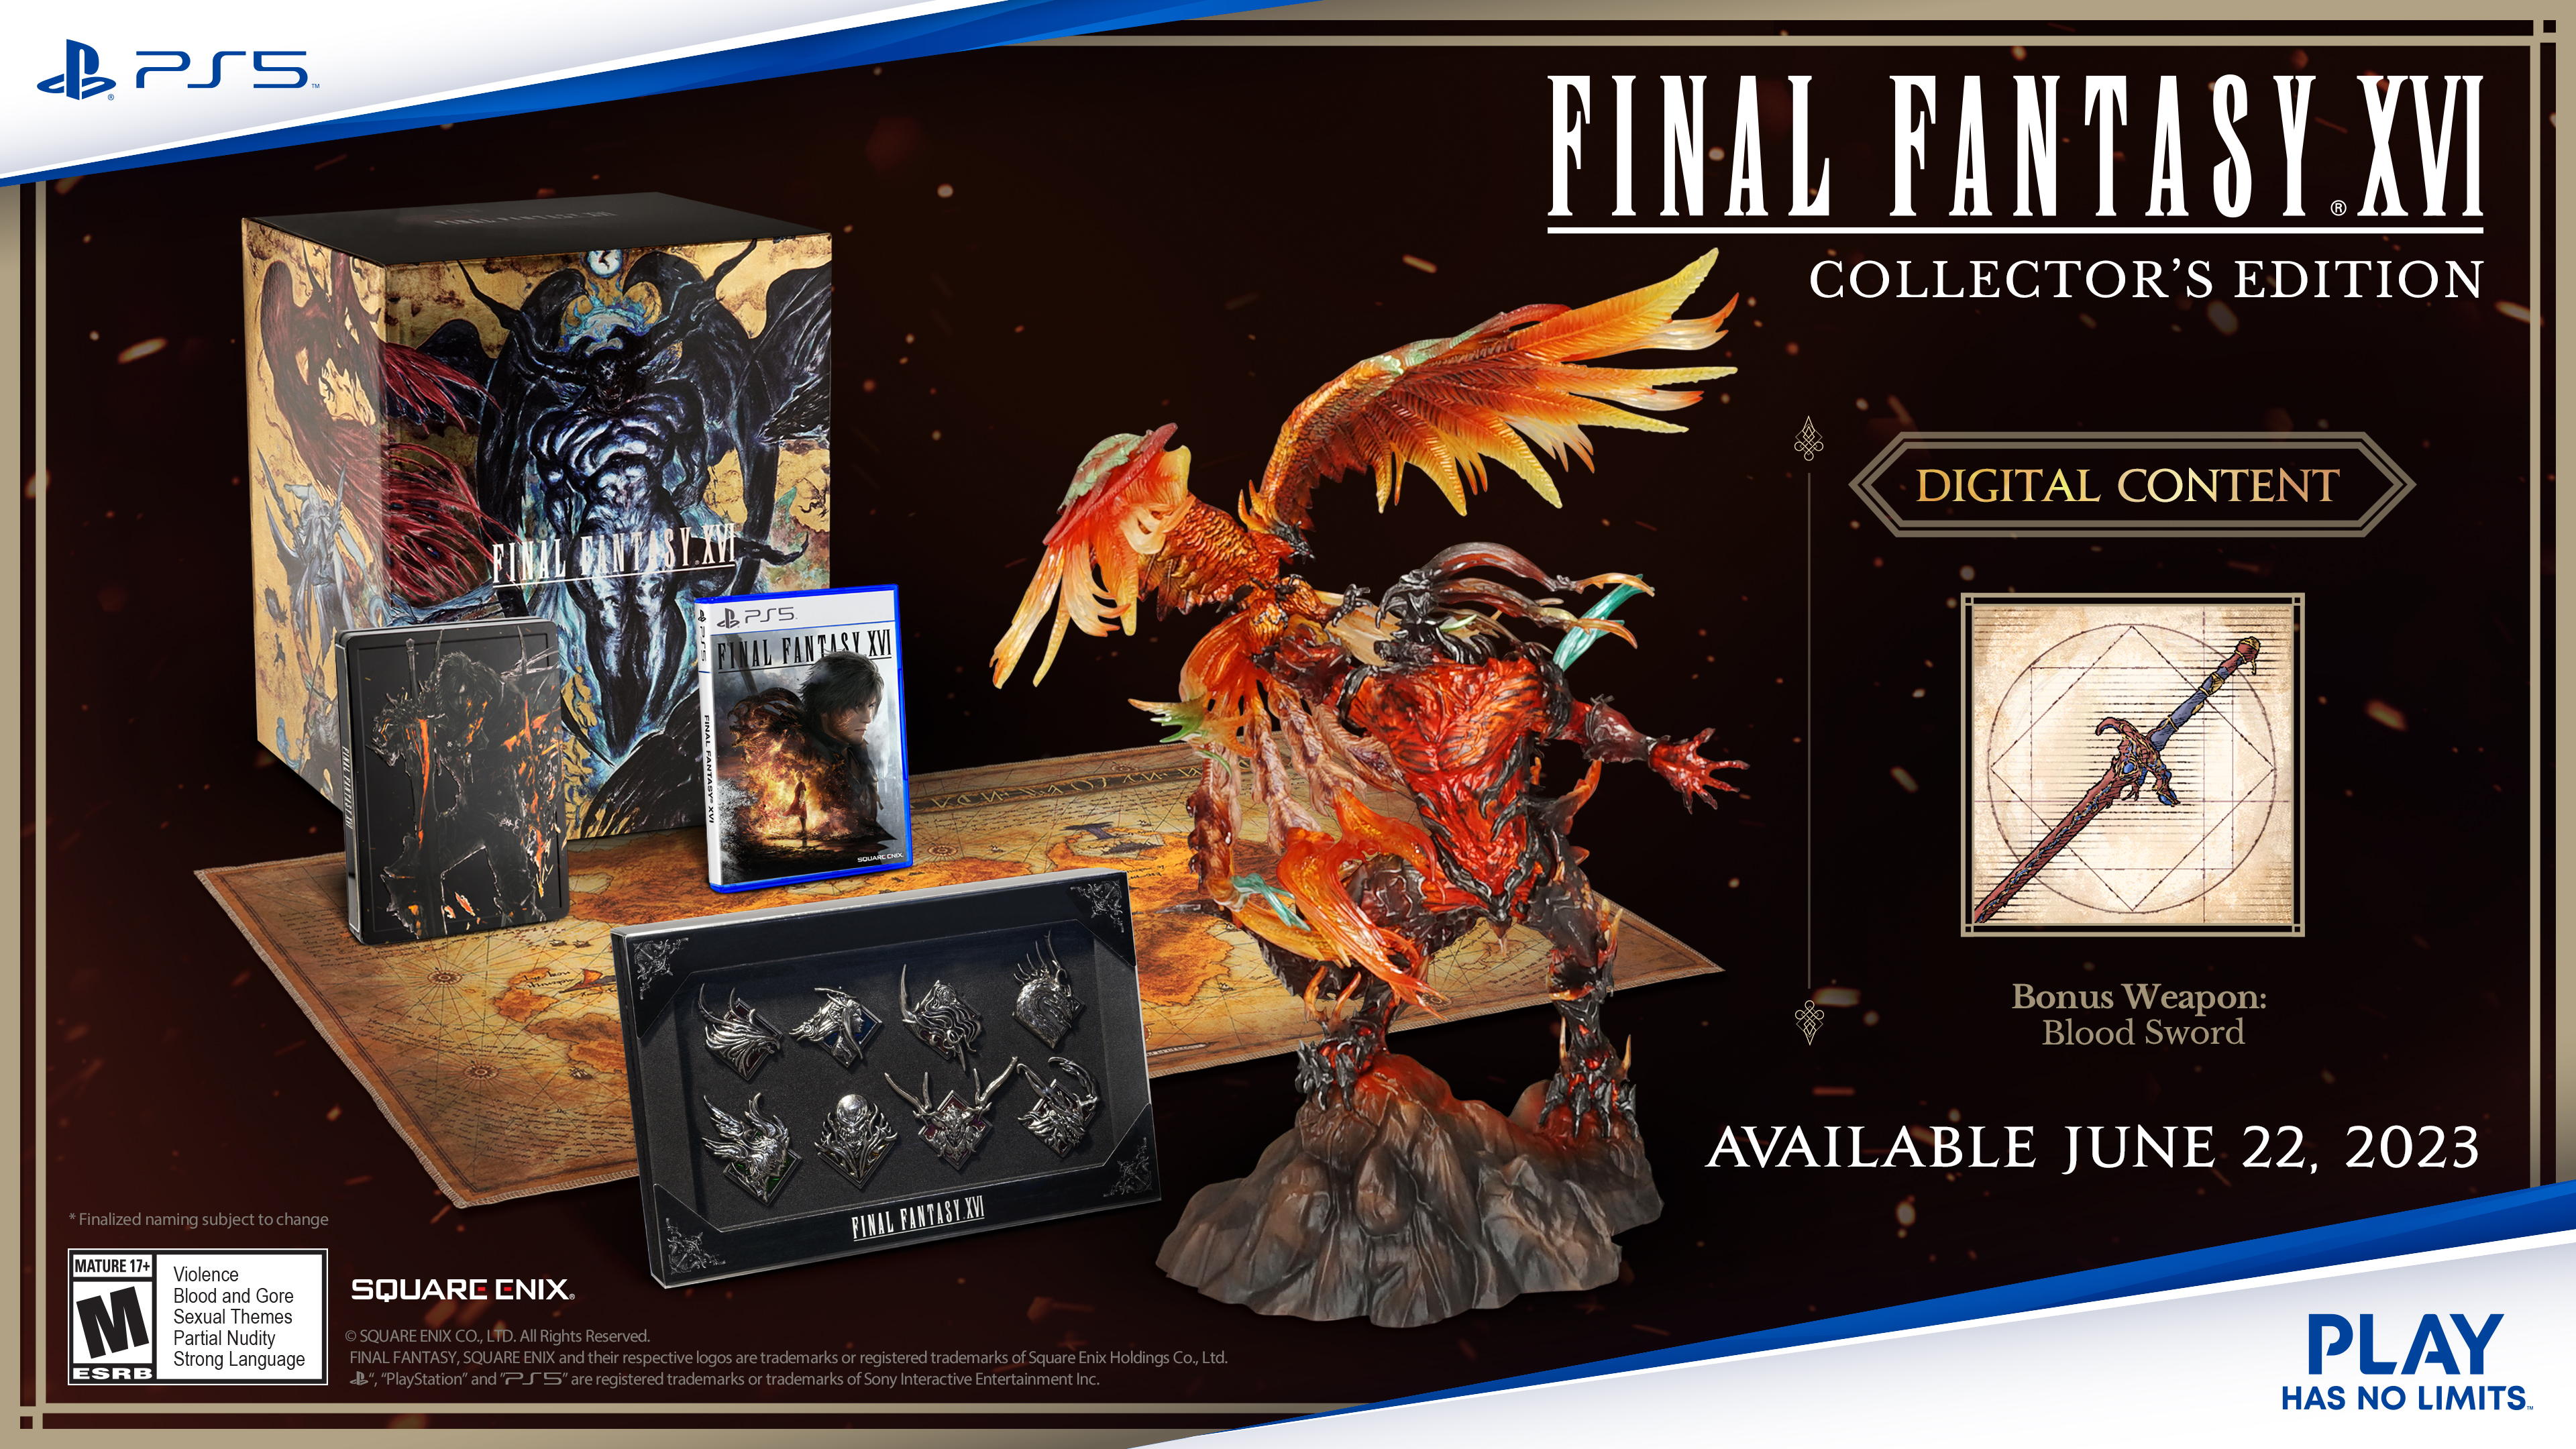 SONY PS5 “FINAL FANTASY XVI” Limited Cover for Digital Edition